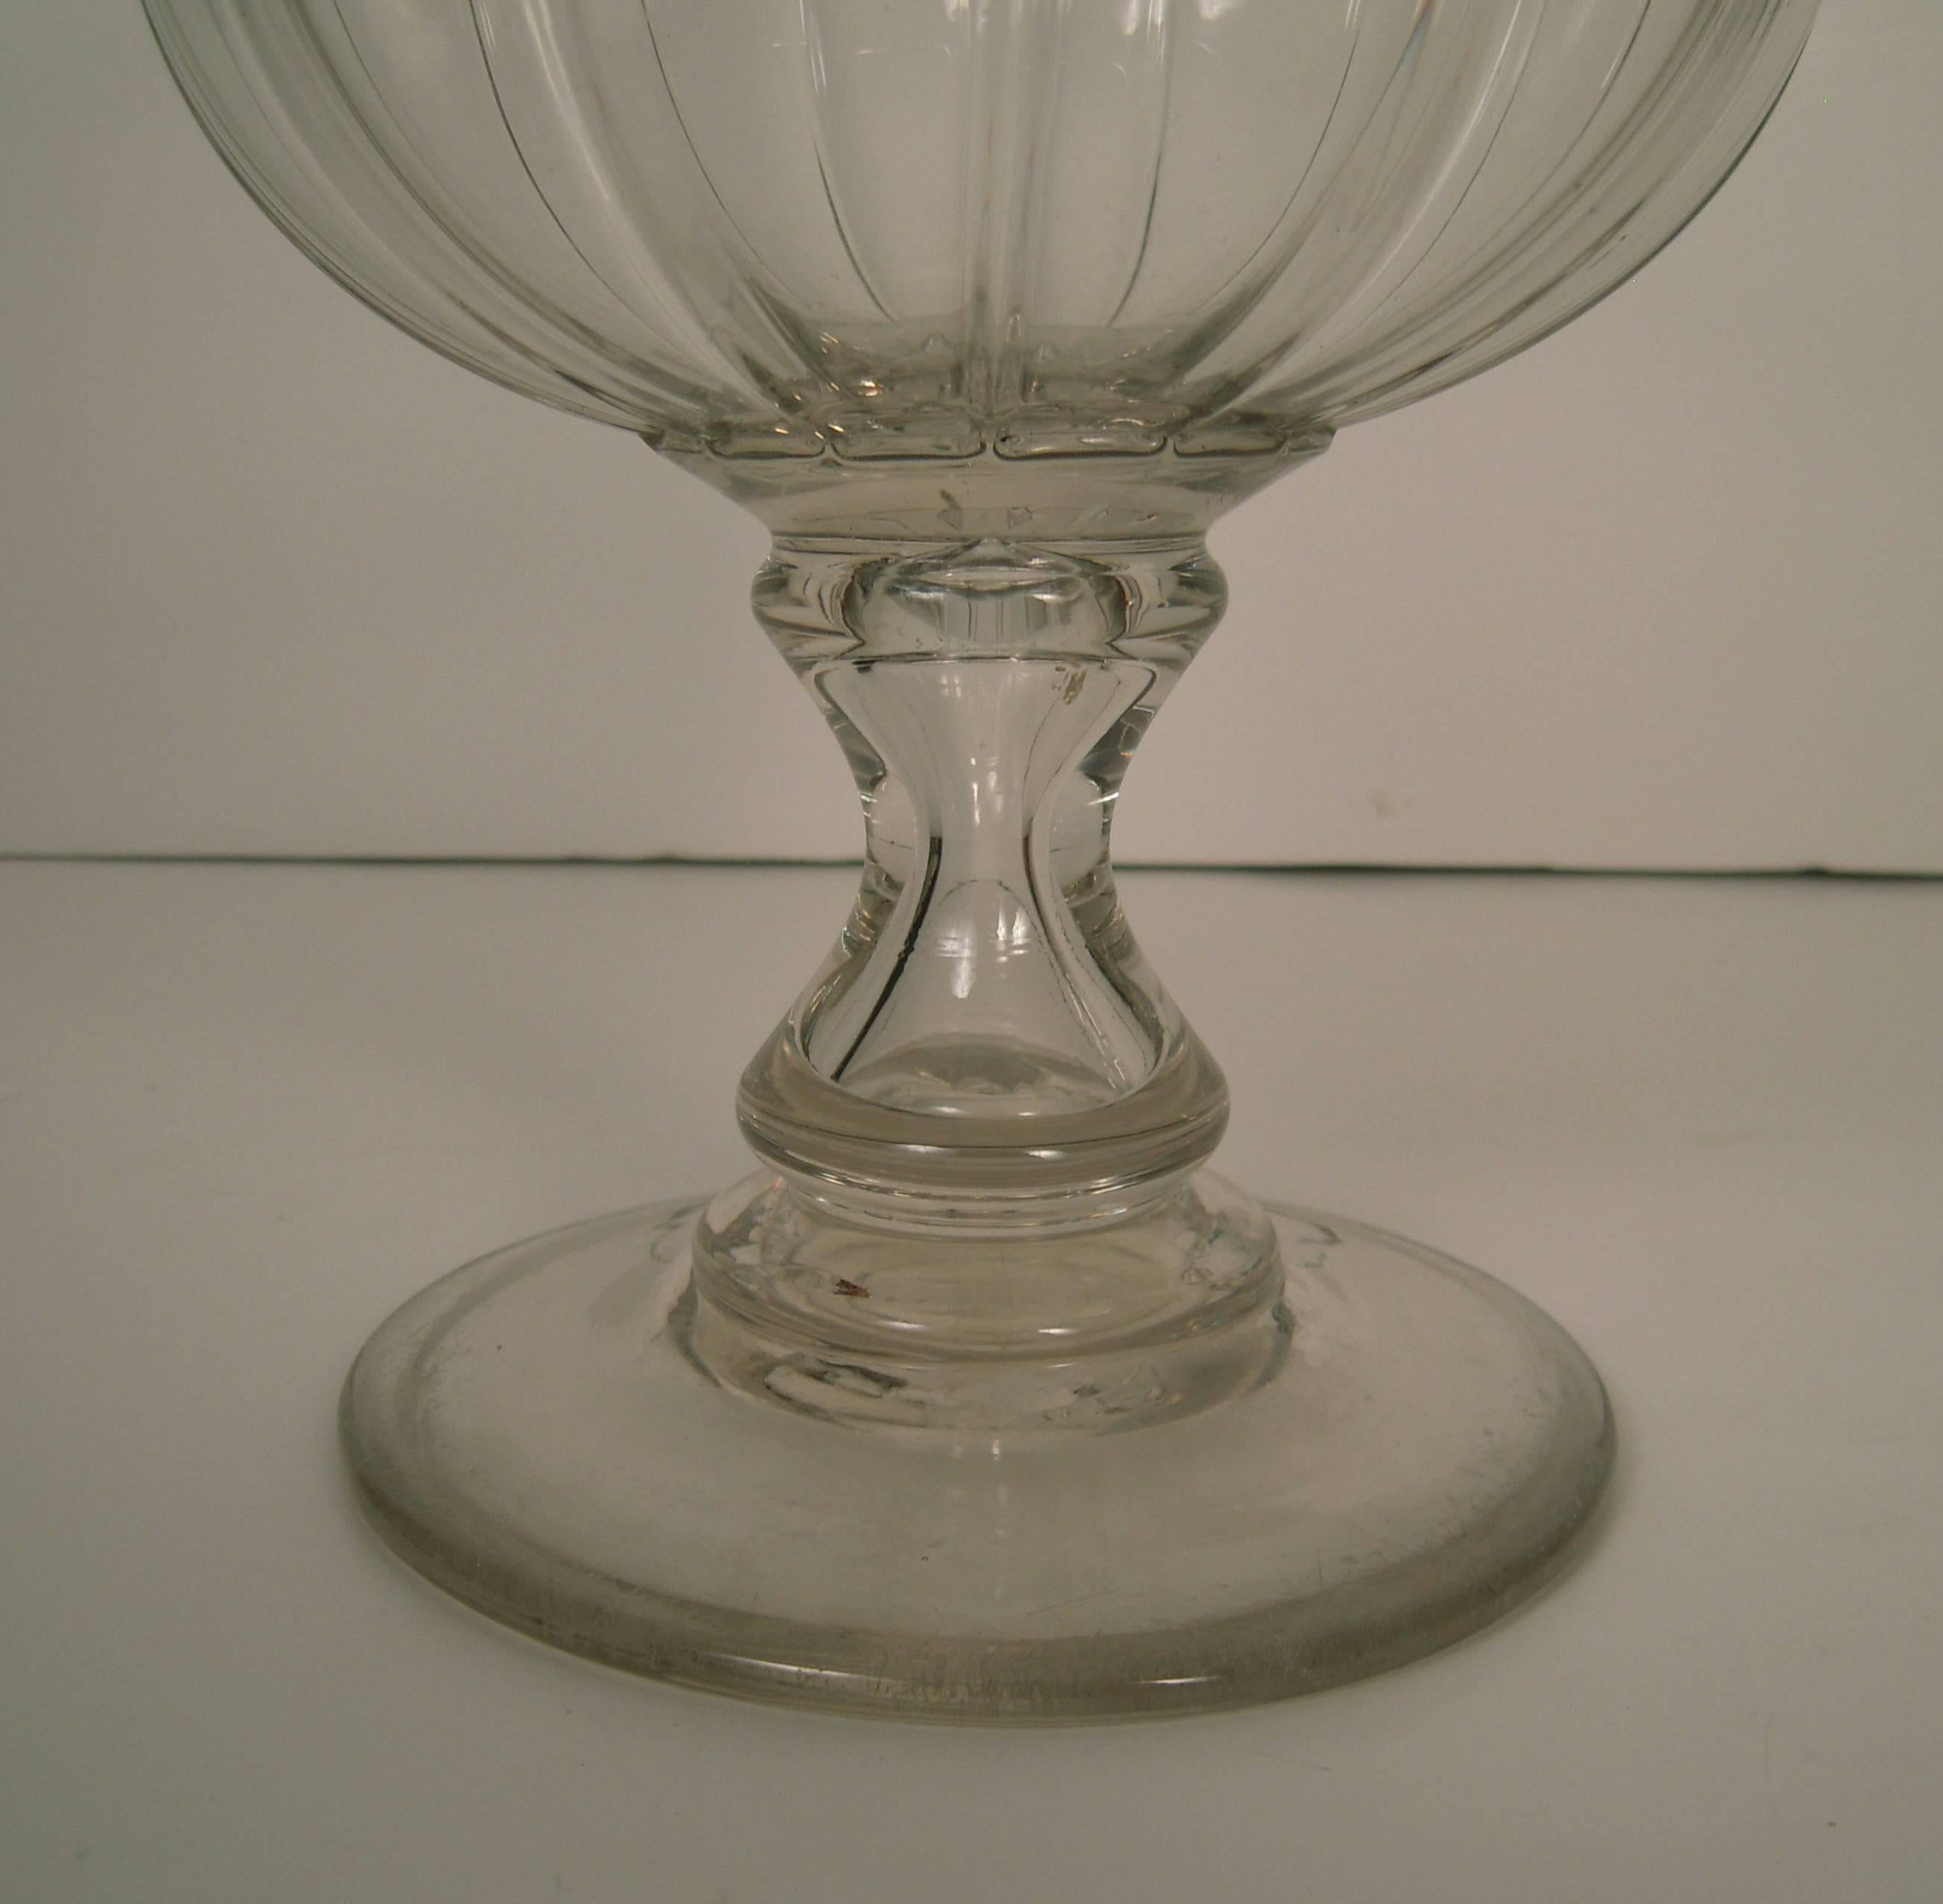 A large 19th century American colorless blown glass vase or goblet ,circa 1830, of inverted bell form with gadroooning ornament on the lower body, supported on a spreading circular base with pontil mark on the underside. Perfect for long-stemmed